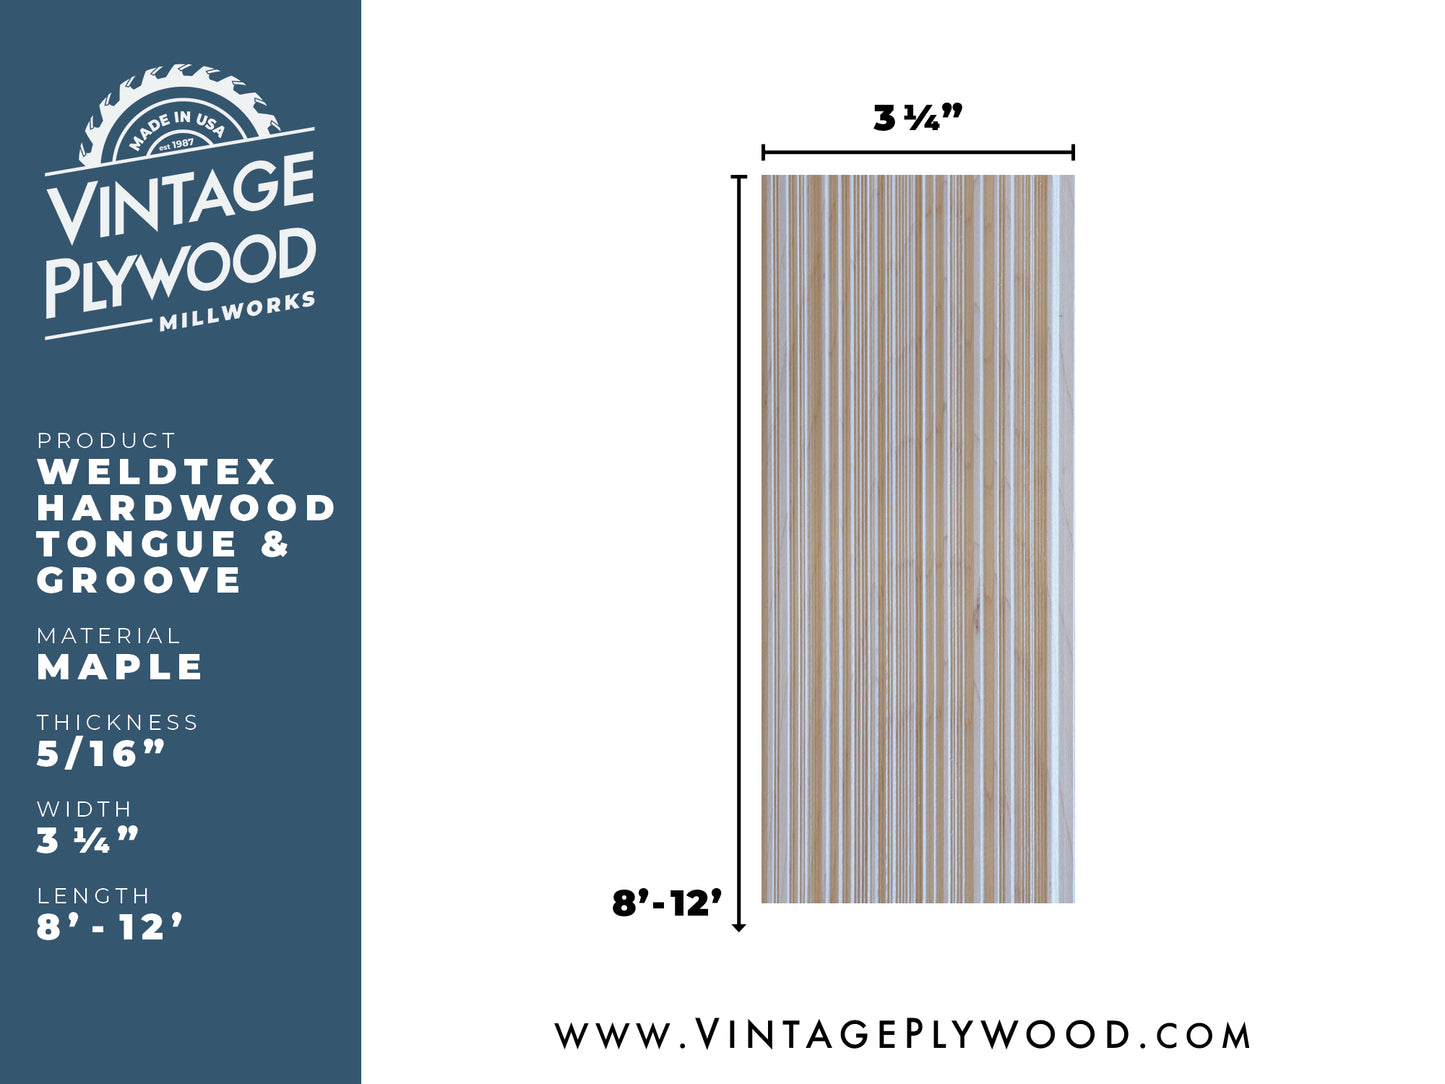 Spec sheet of Weldtex tongue & groove maple hardwood plank consisting of a combed, striated, brushed wood appearance common in mid-century modern homes and design